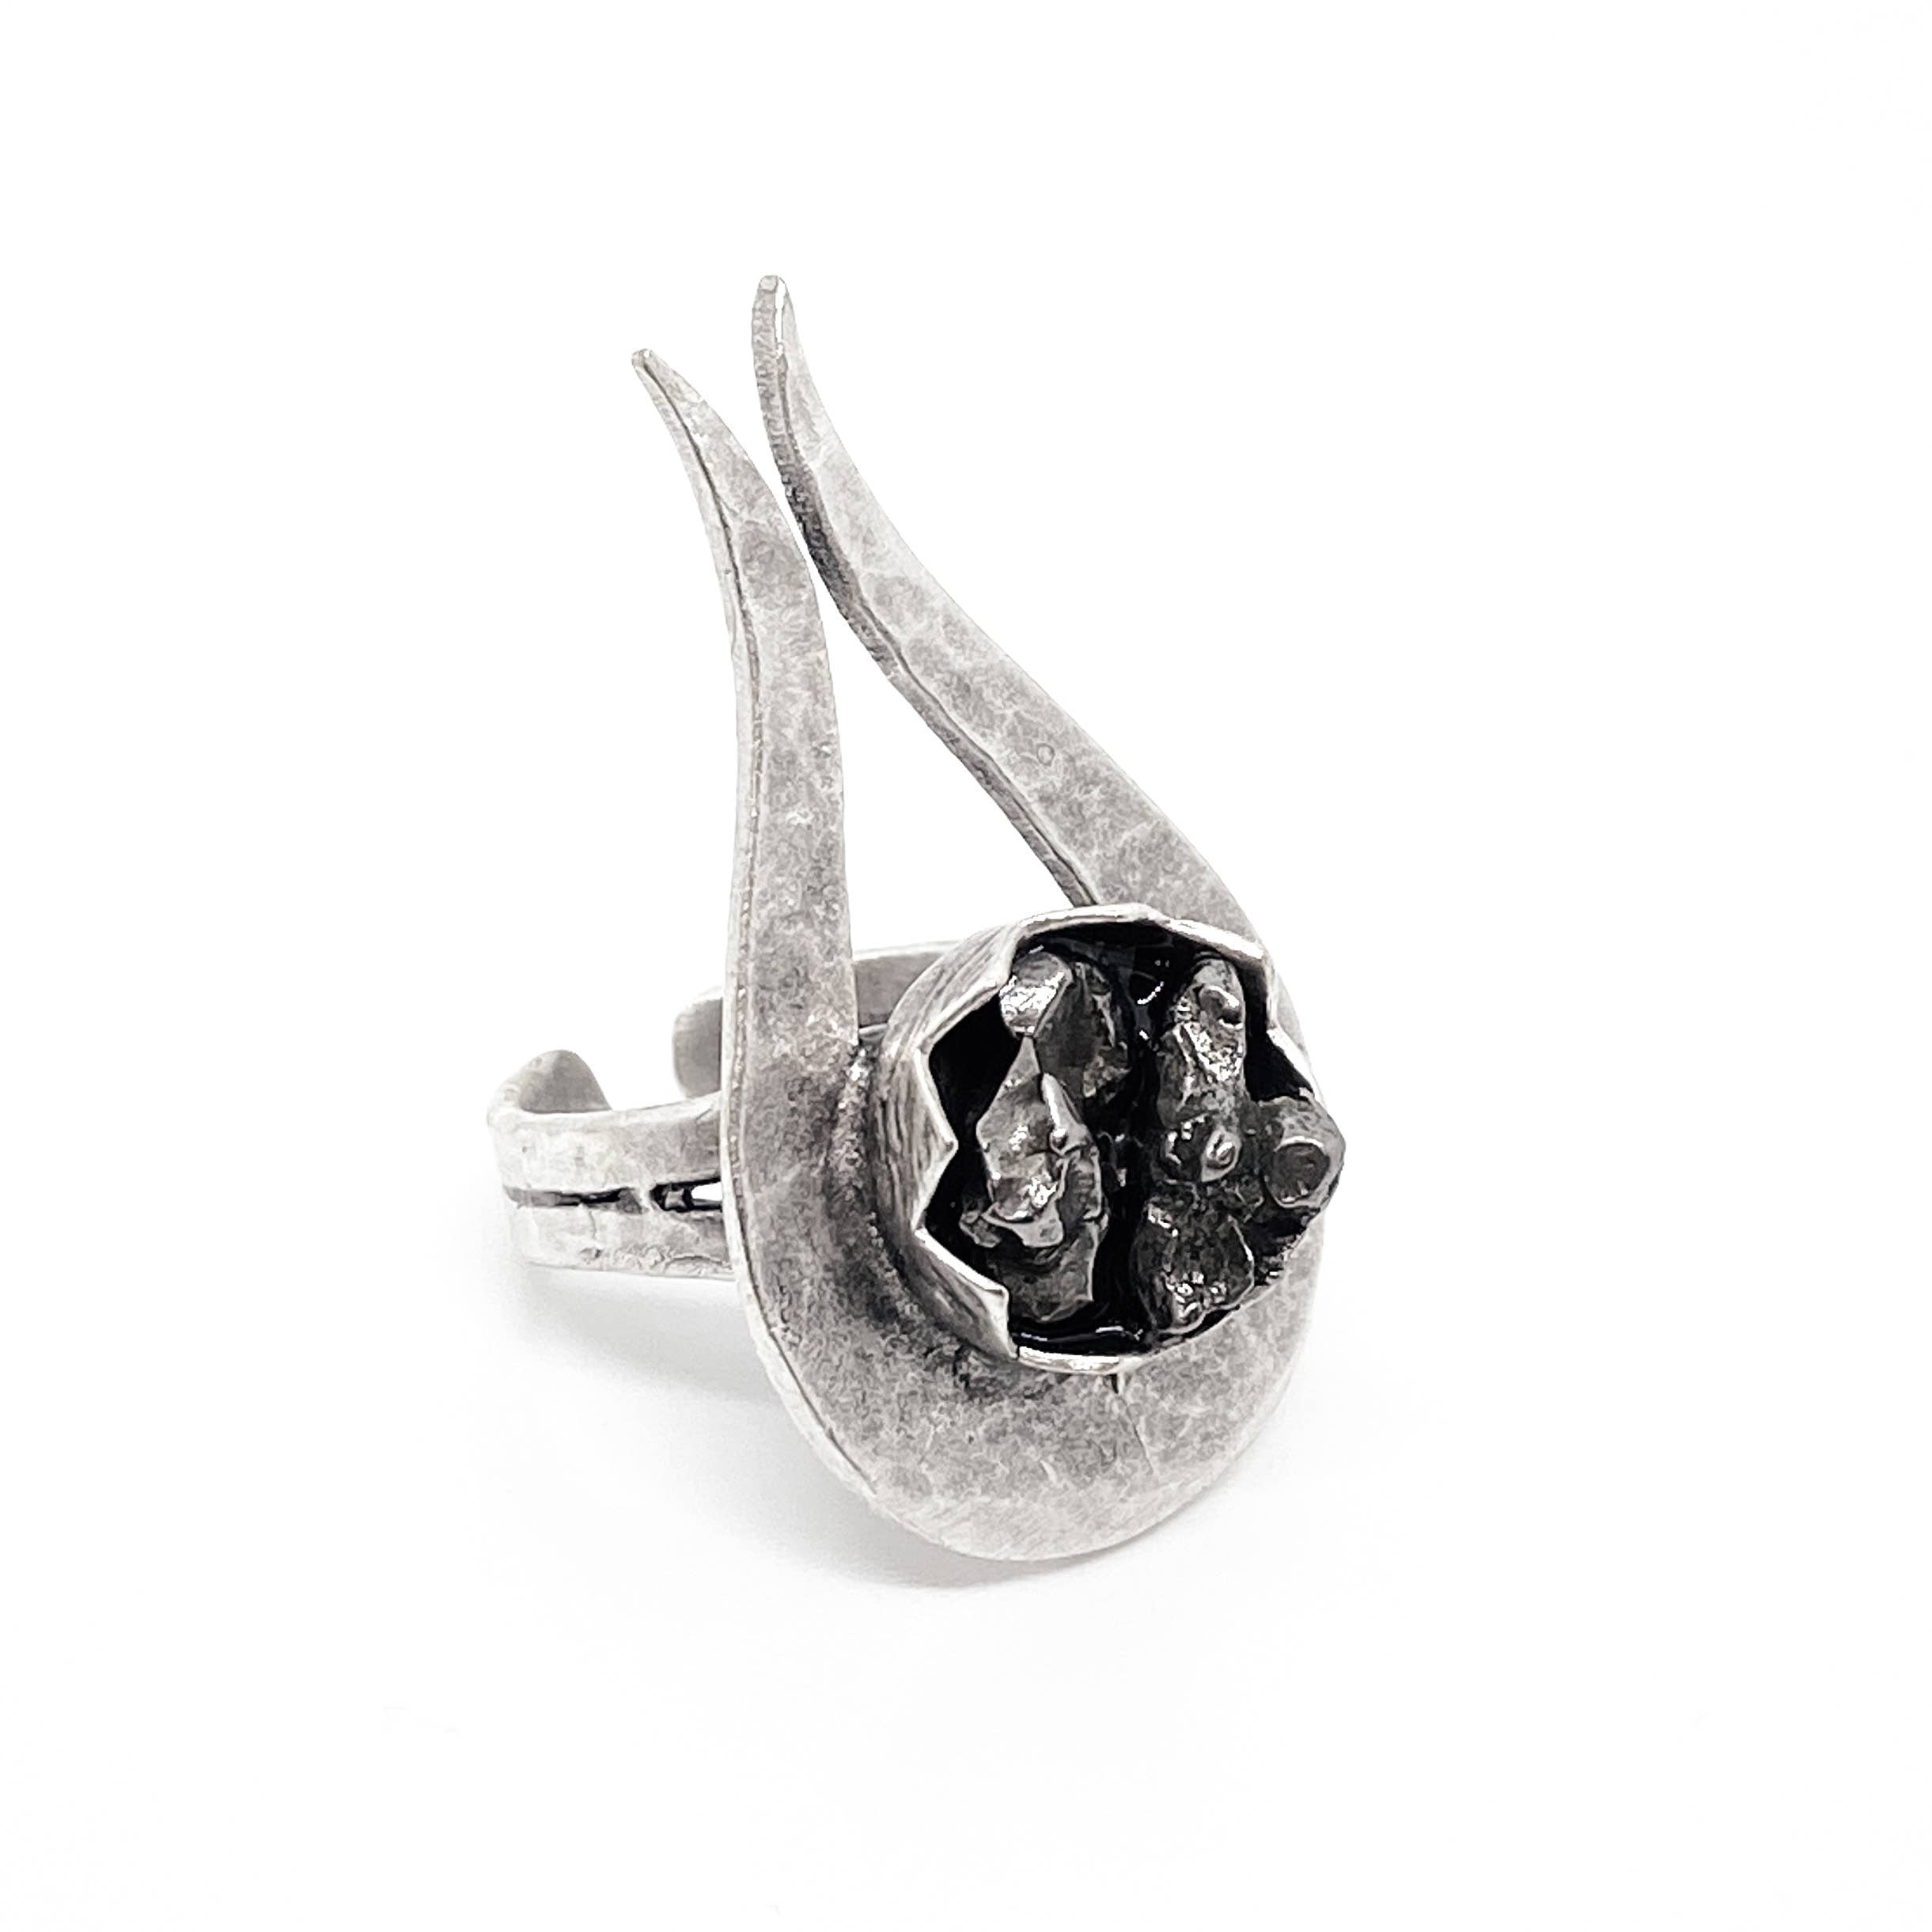 The Comet Ring - Meteorite Jewelry - The Gilded Witch